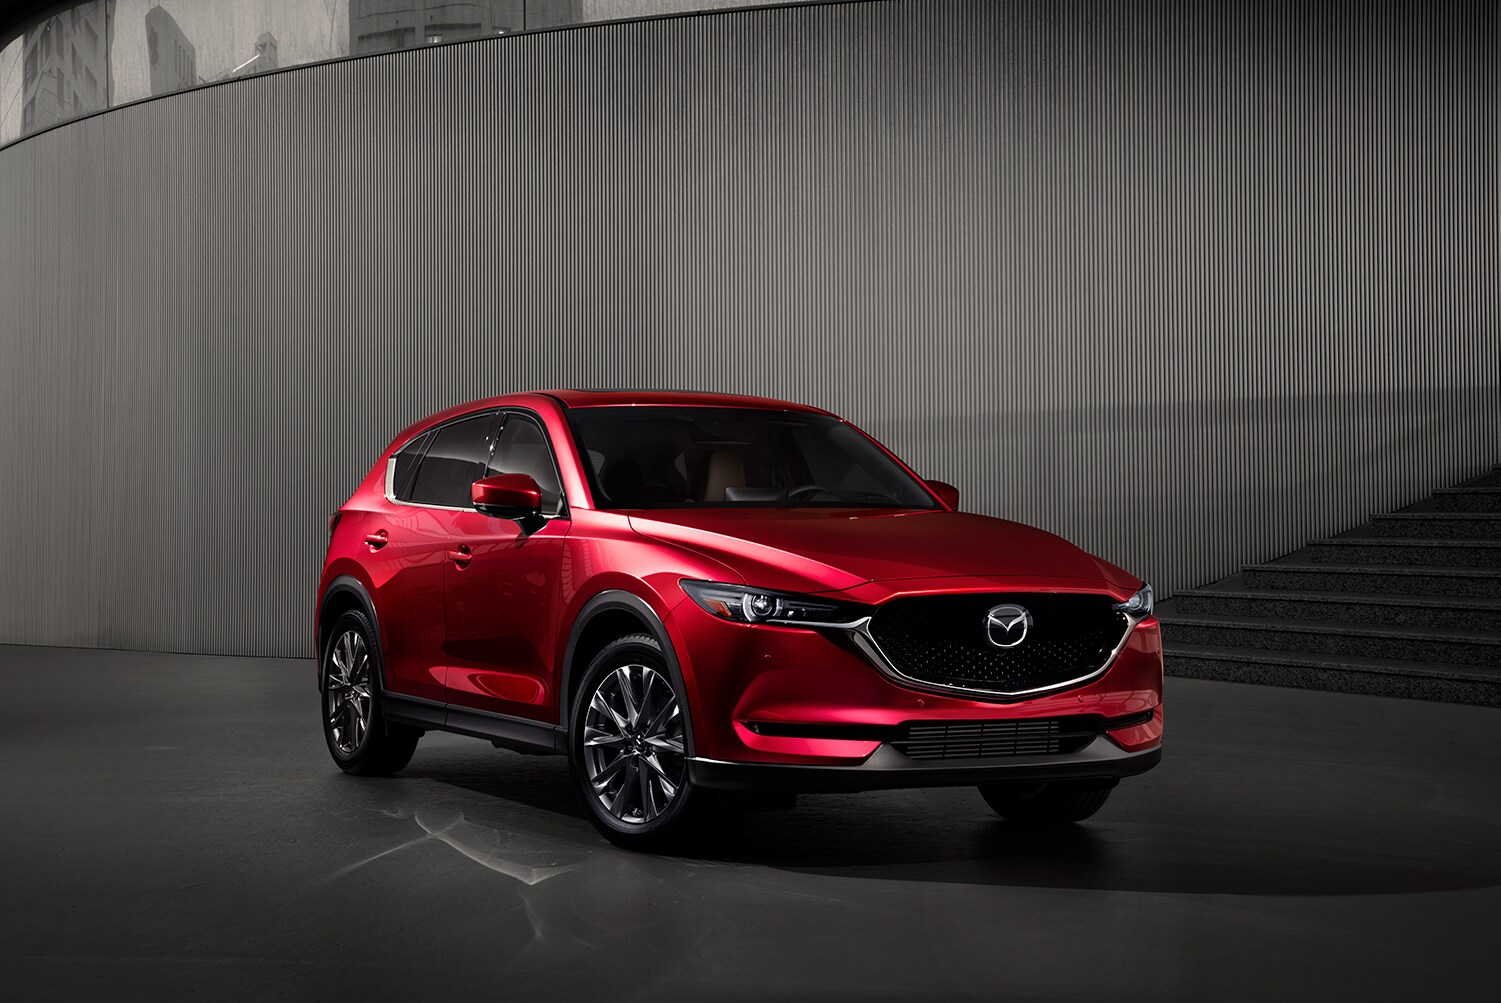 the 2021 Mazda CX-5 versus the 2021 Ford Escape at Jack Giambalvo Mazda of York | 2021 Mazda CX-5 parked in front of a building